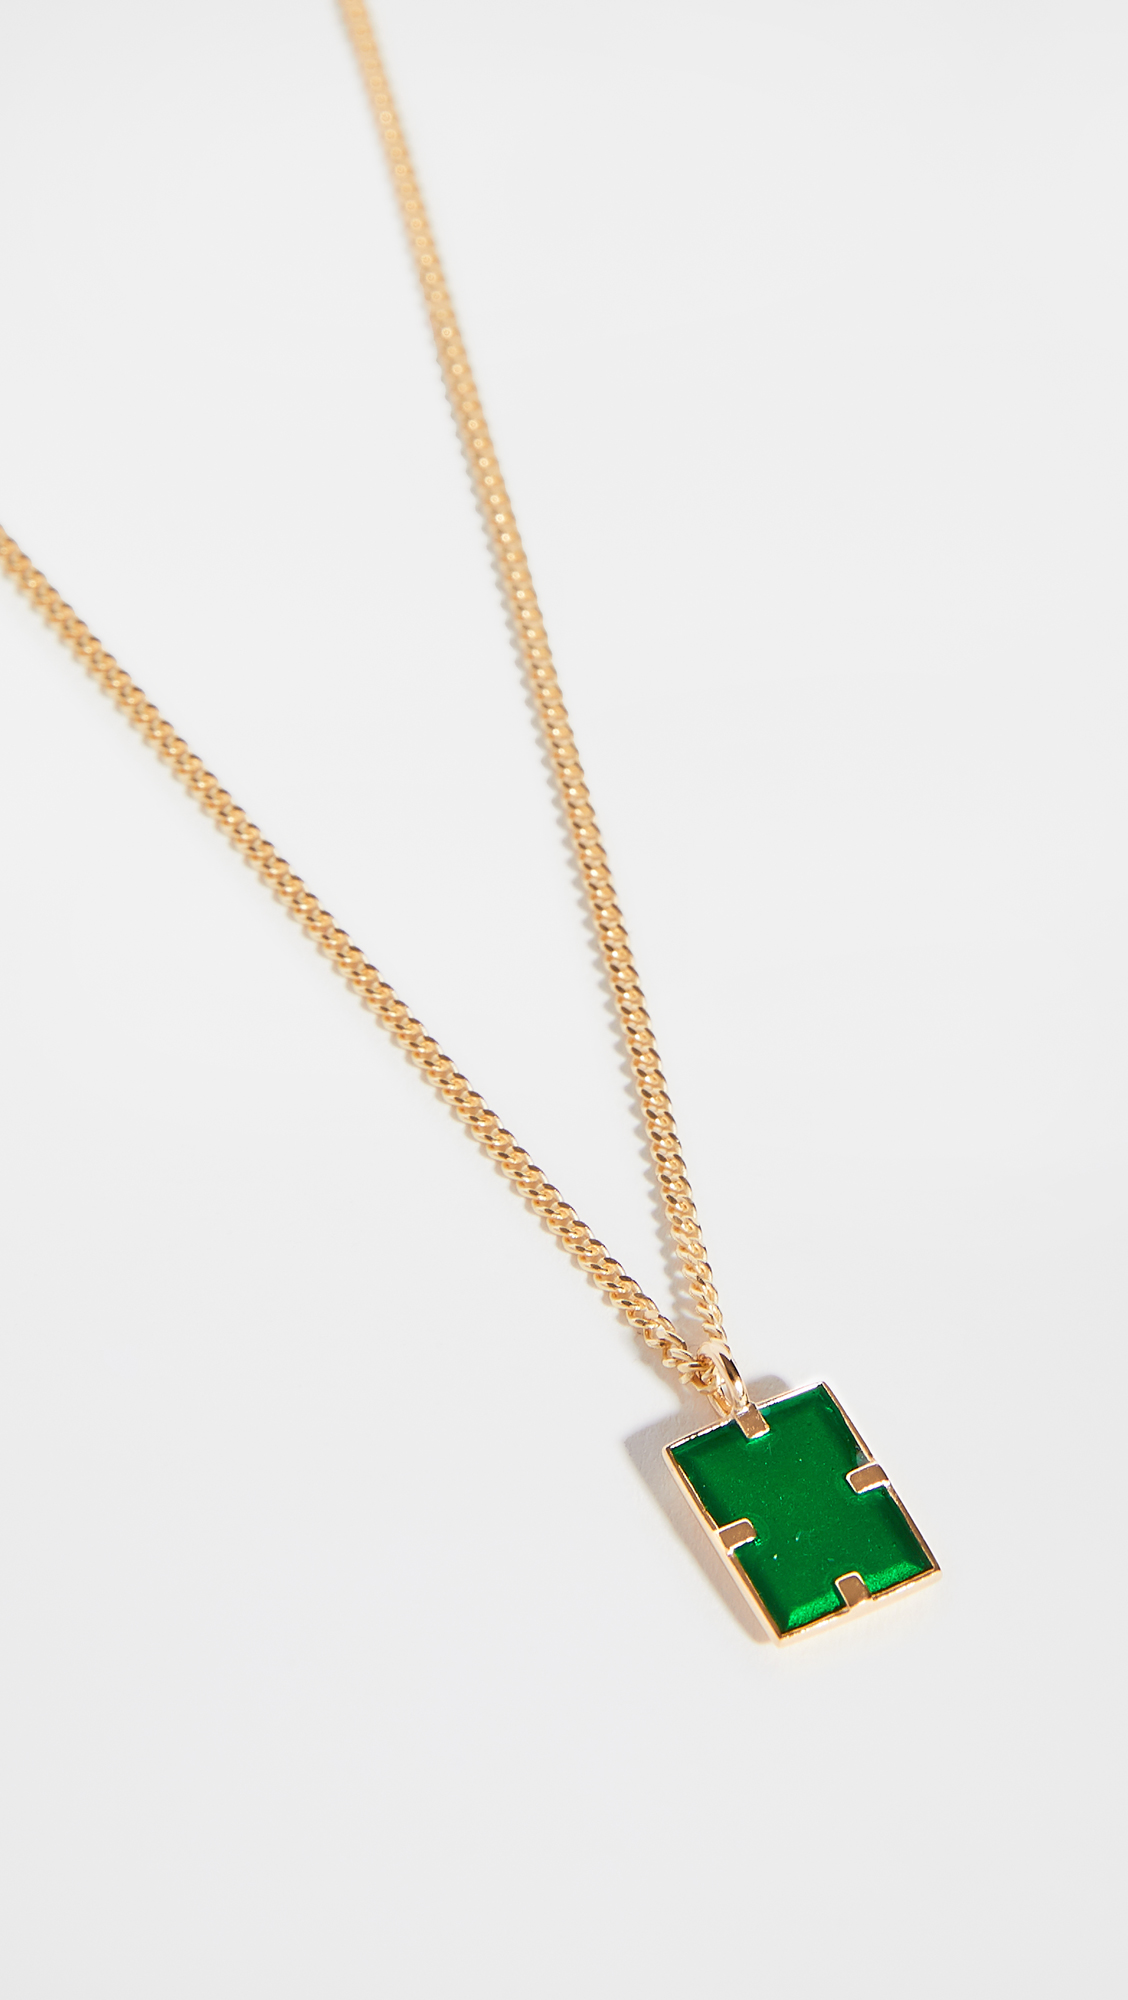 31 Everyday Necklaces You'll Never Want to Take Off | Who What Wear